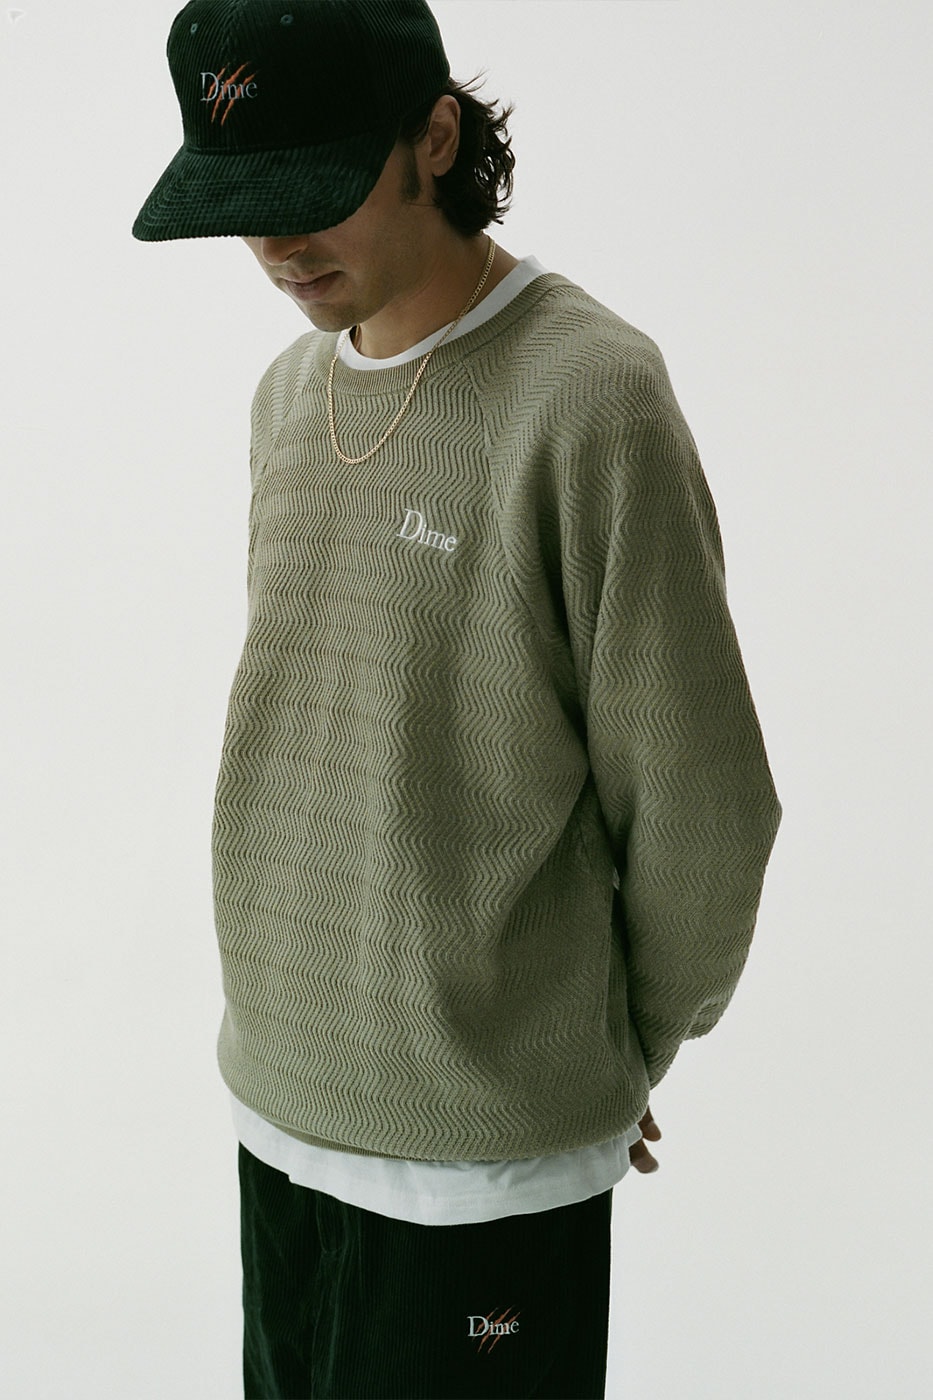 Dime Fall 2022 Collection First Drop Beanies Jackets Knitwear Corduroy